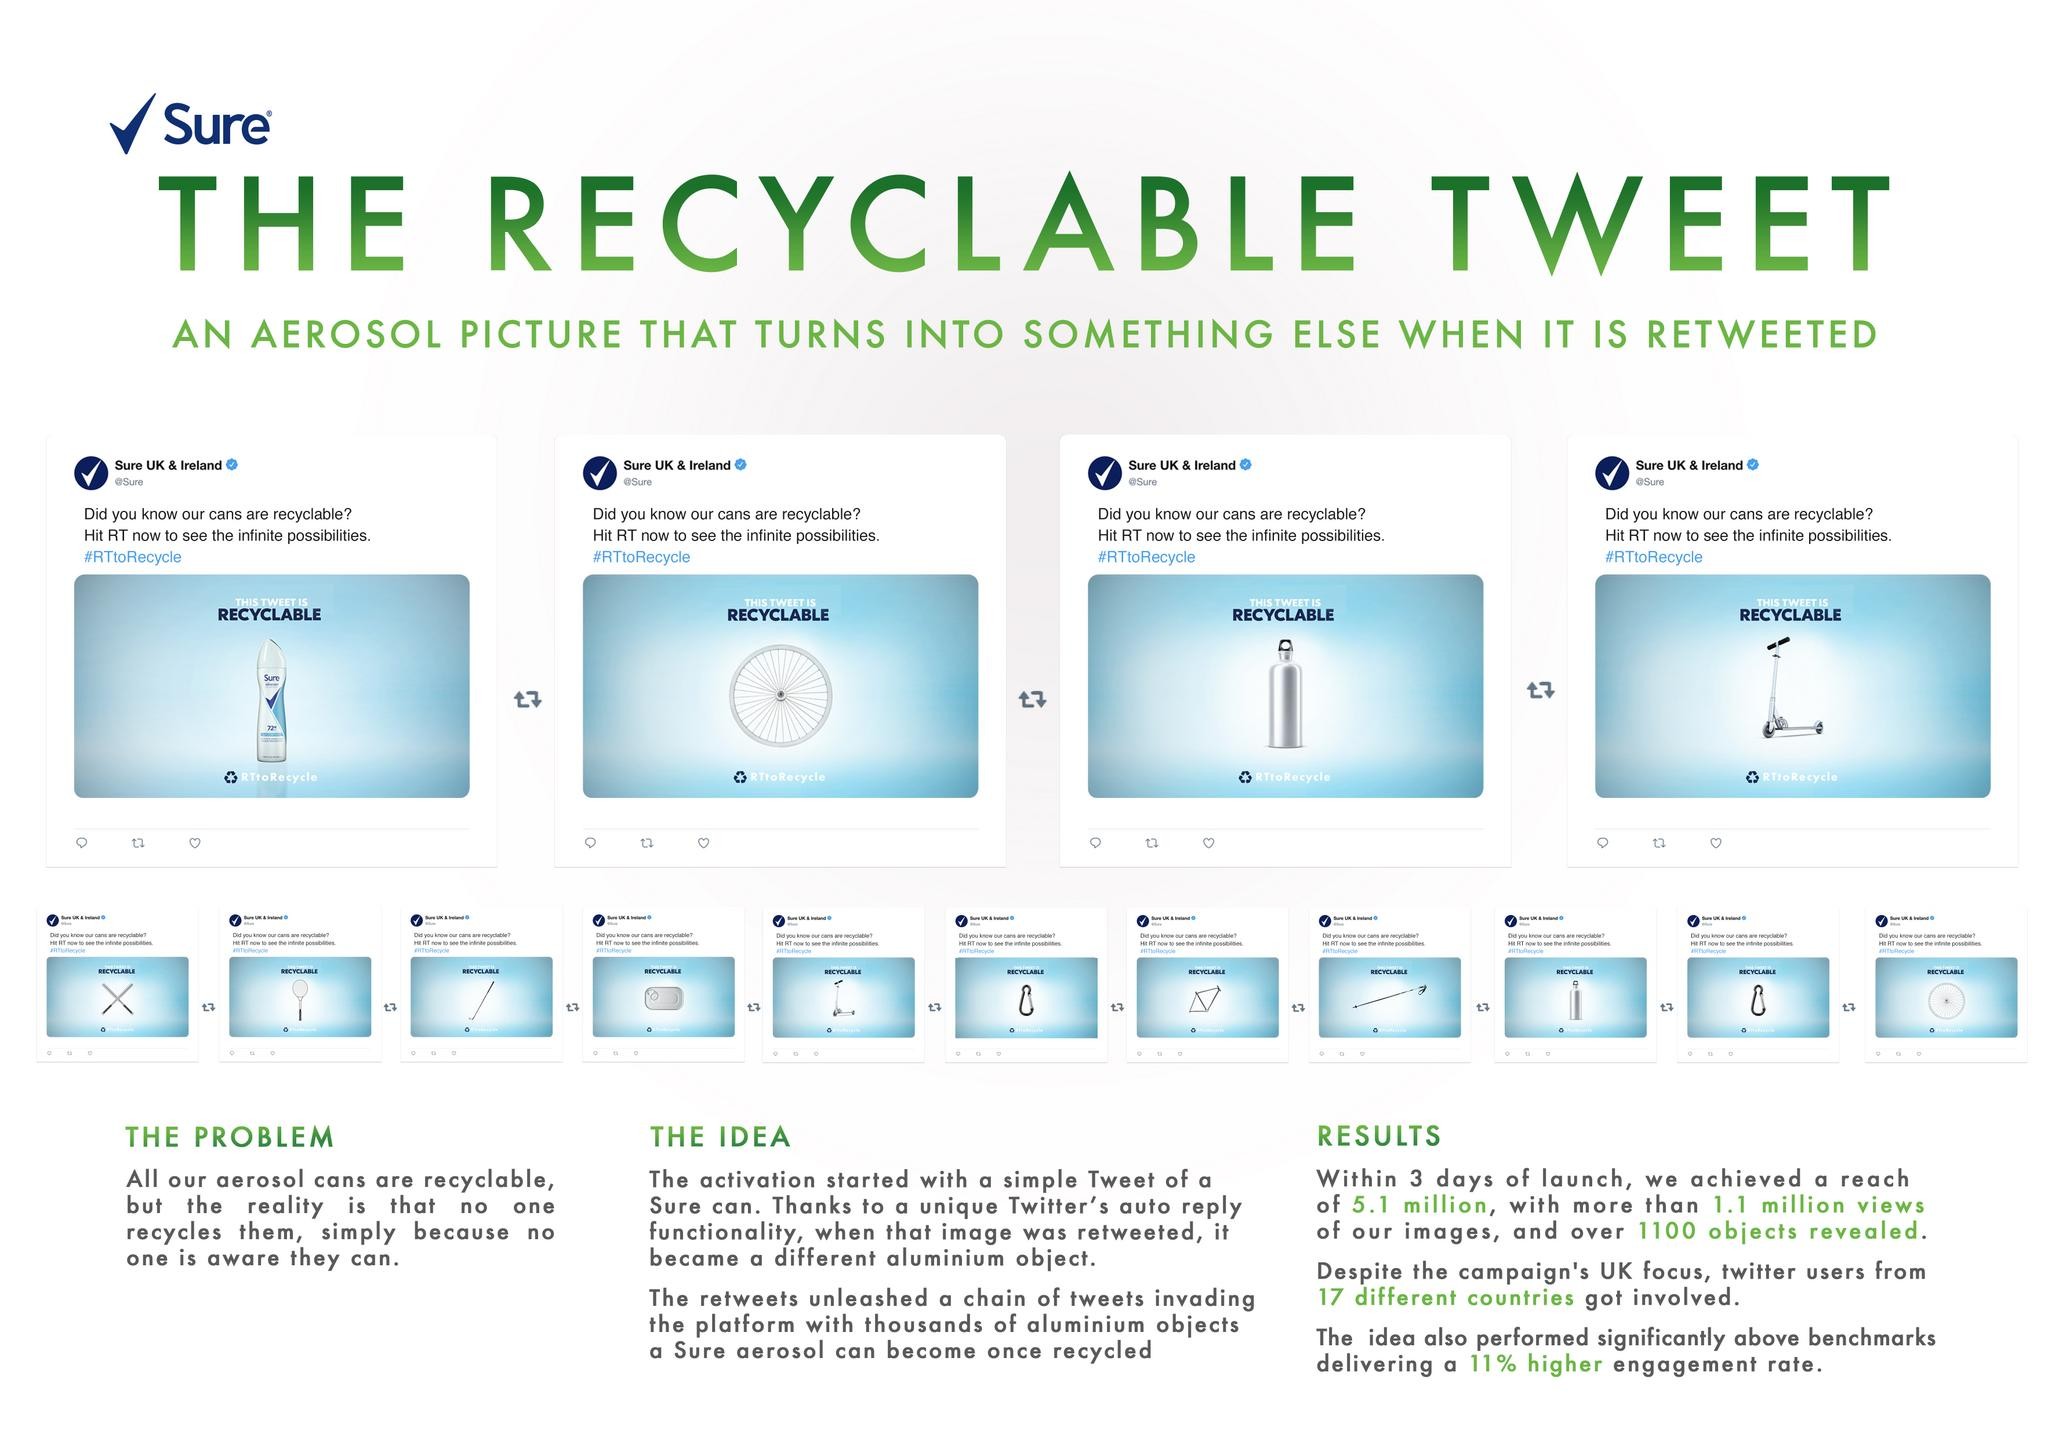 THE RECYCLABLE TWEET